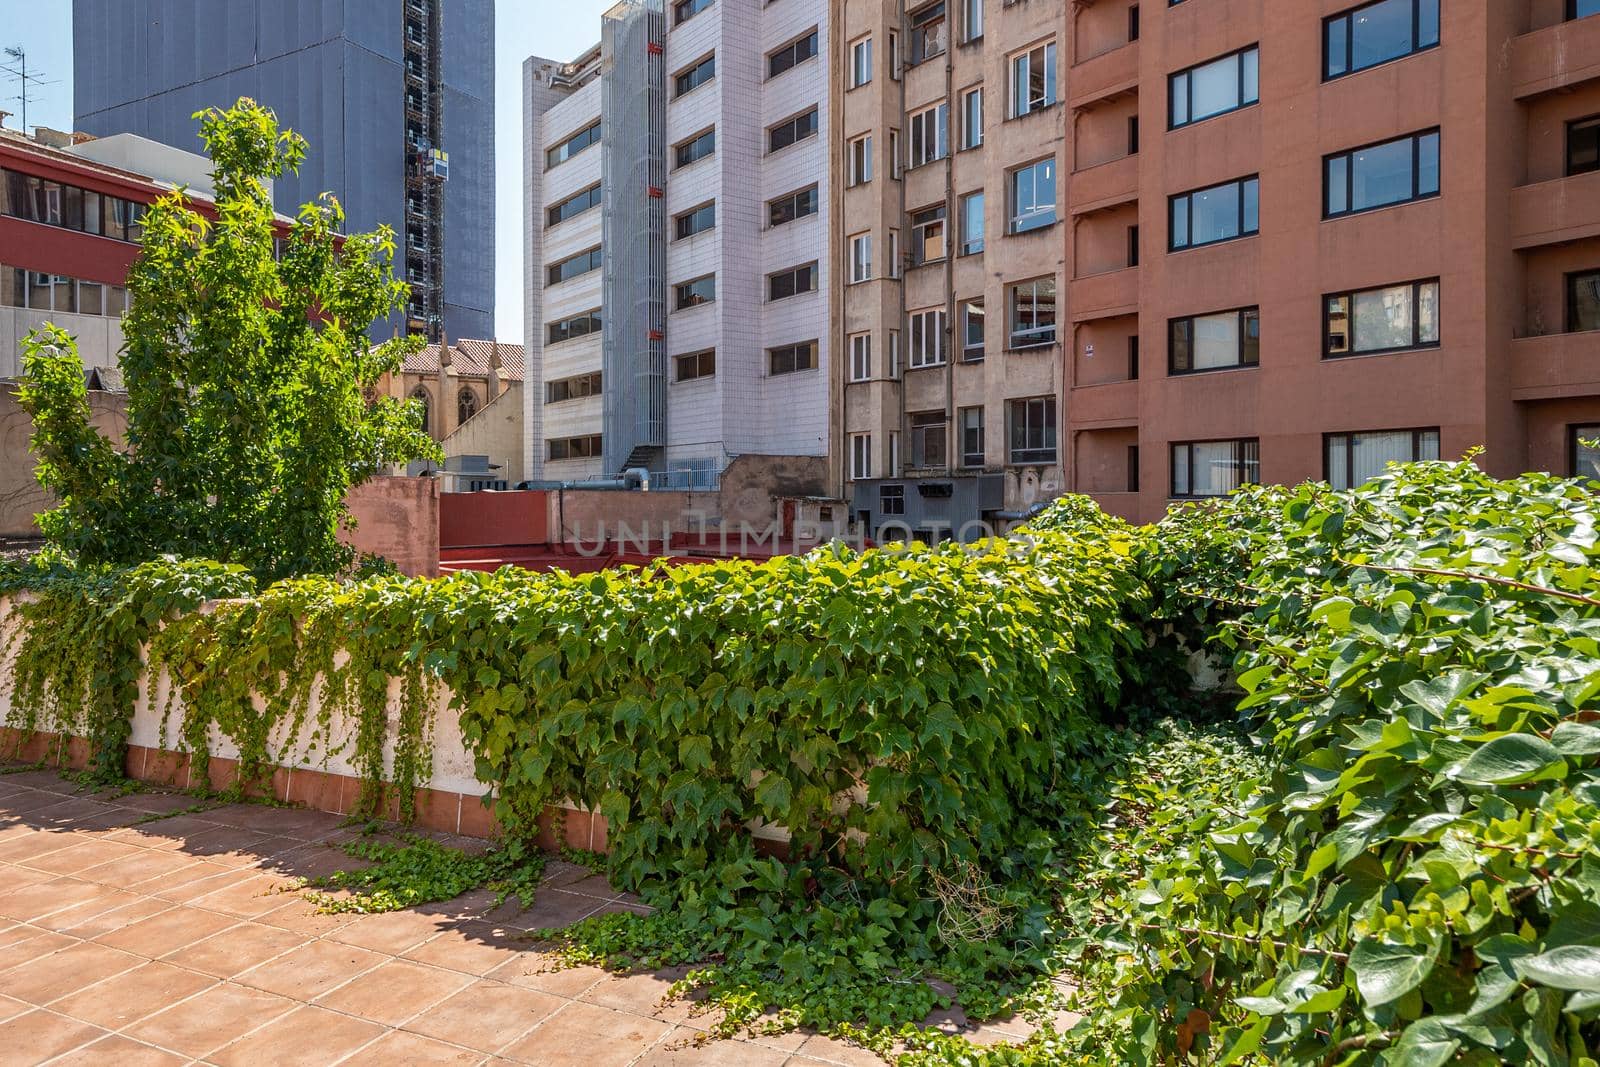 A small wall overgrown with green vegetation in a center of a city